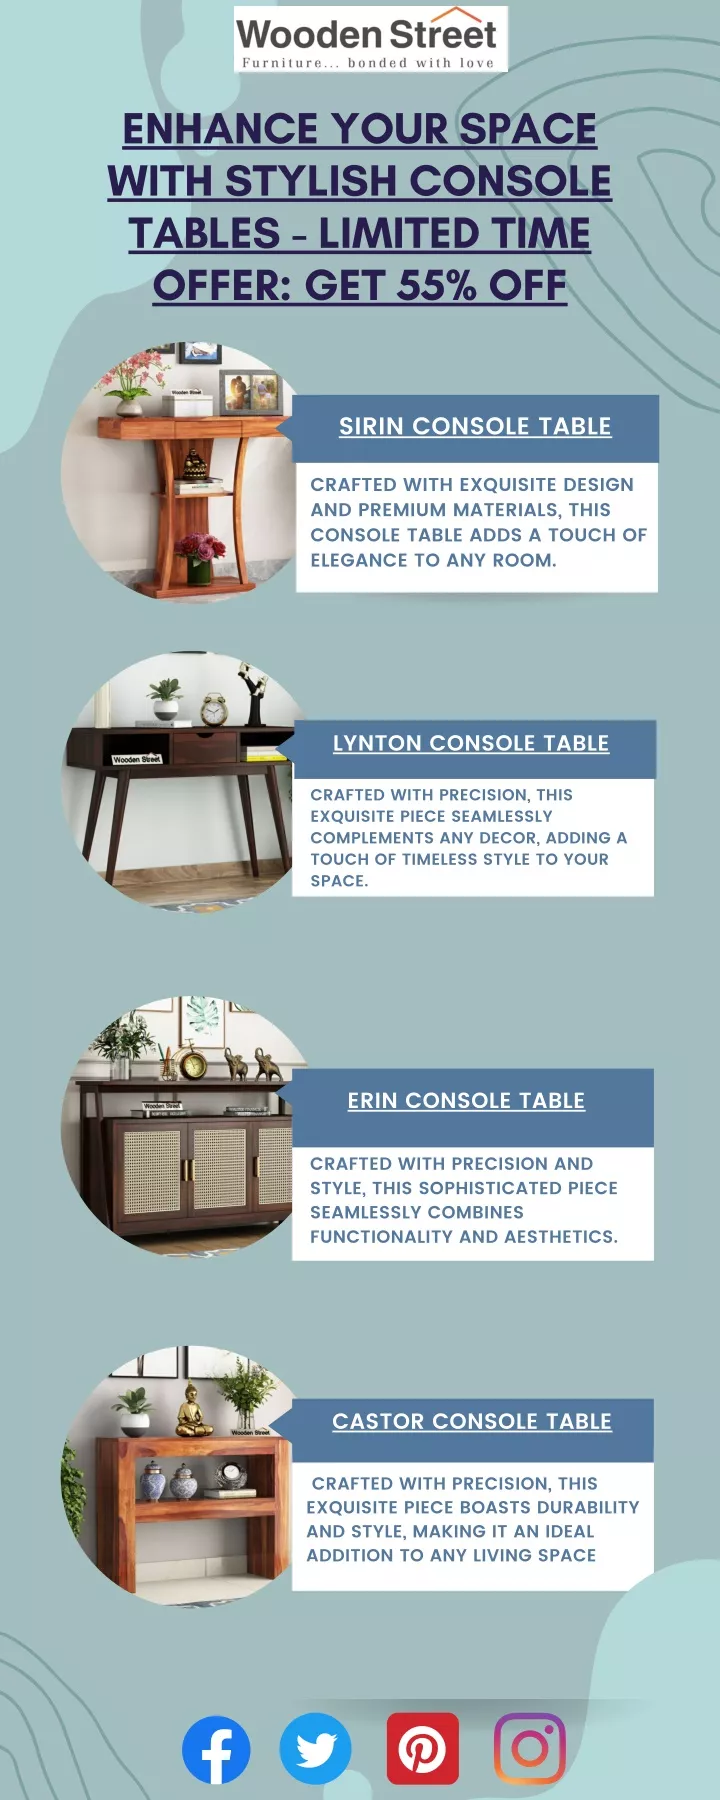 enhance your space with stylish console tables